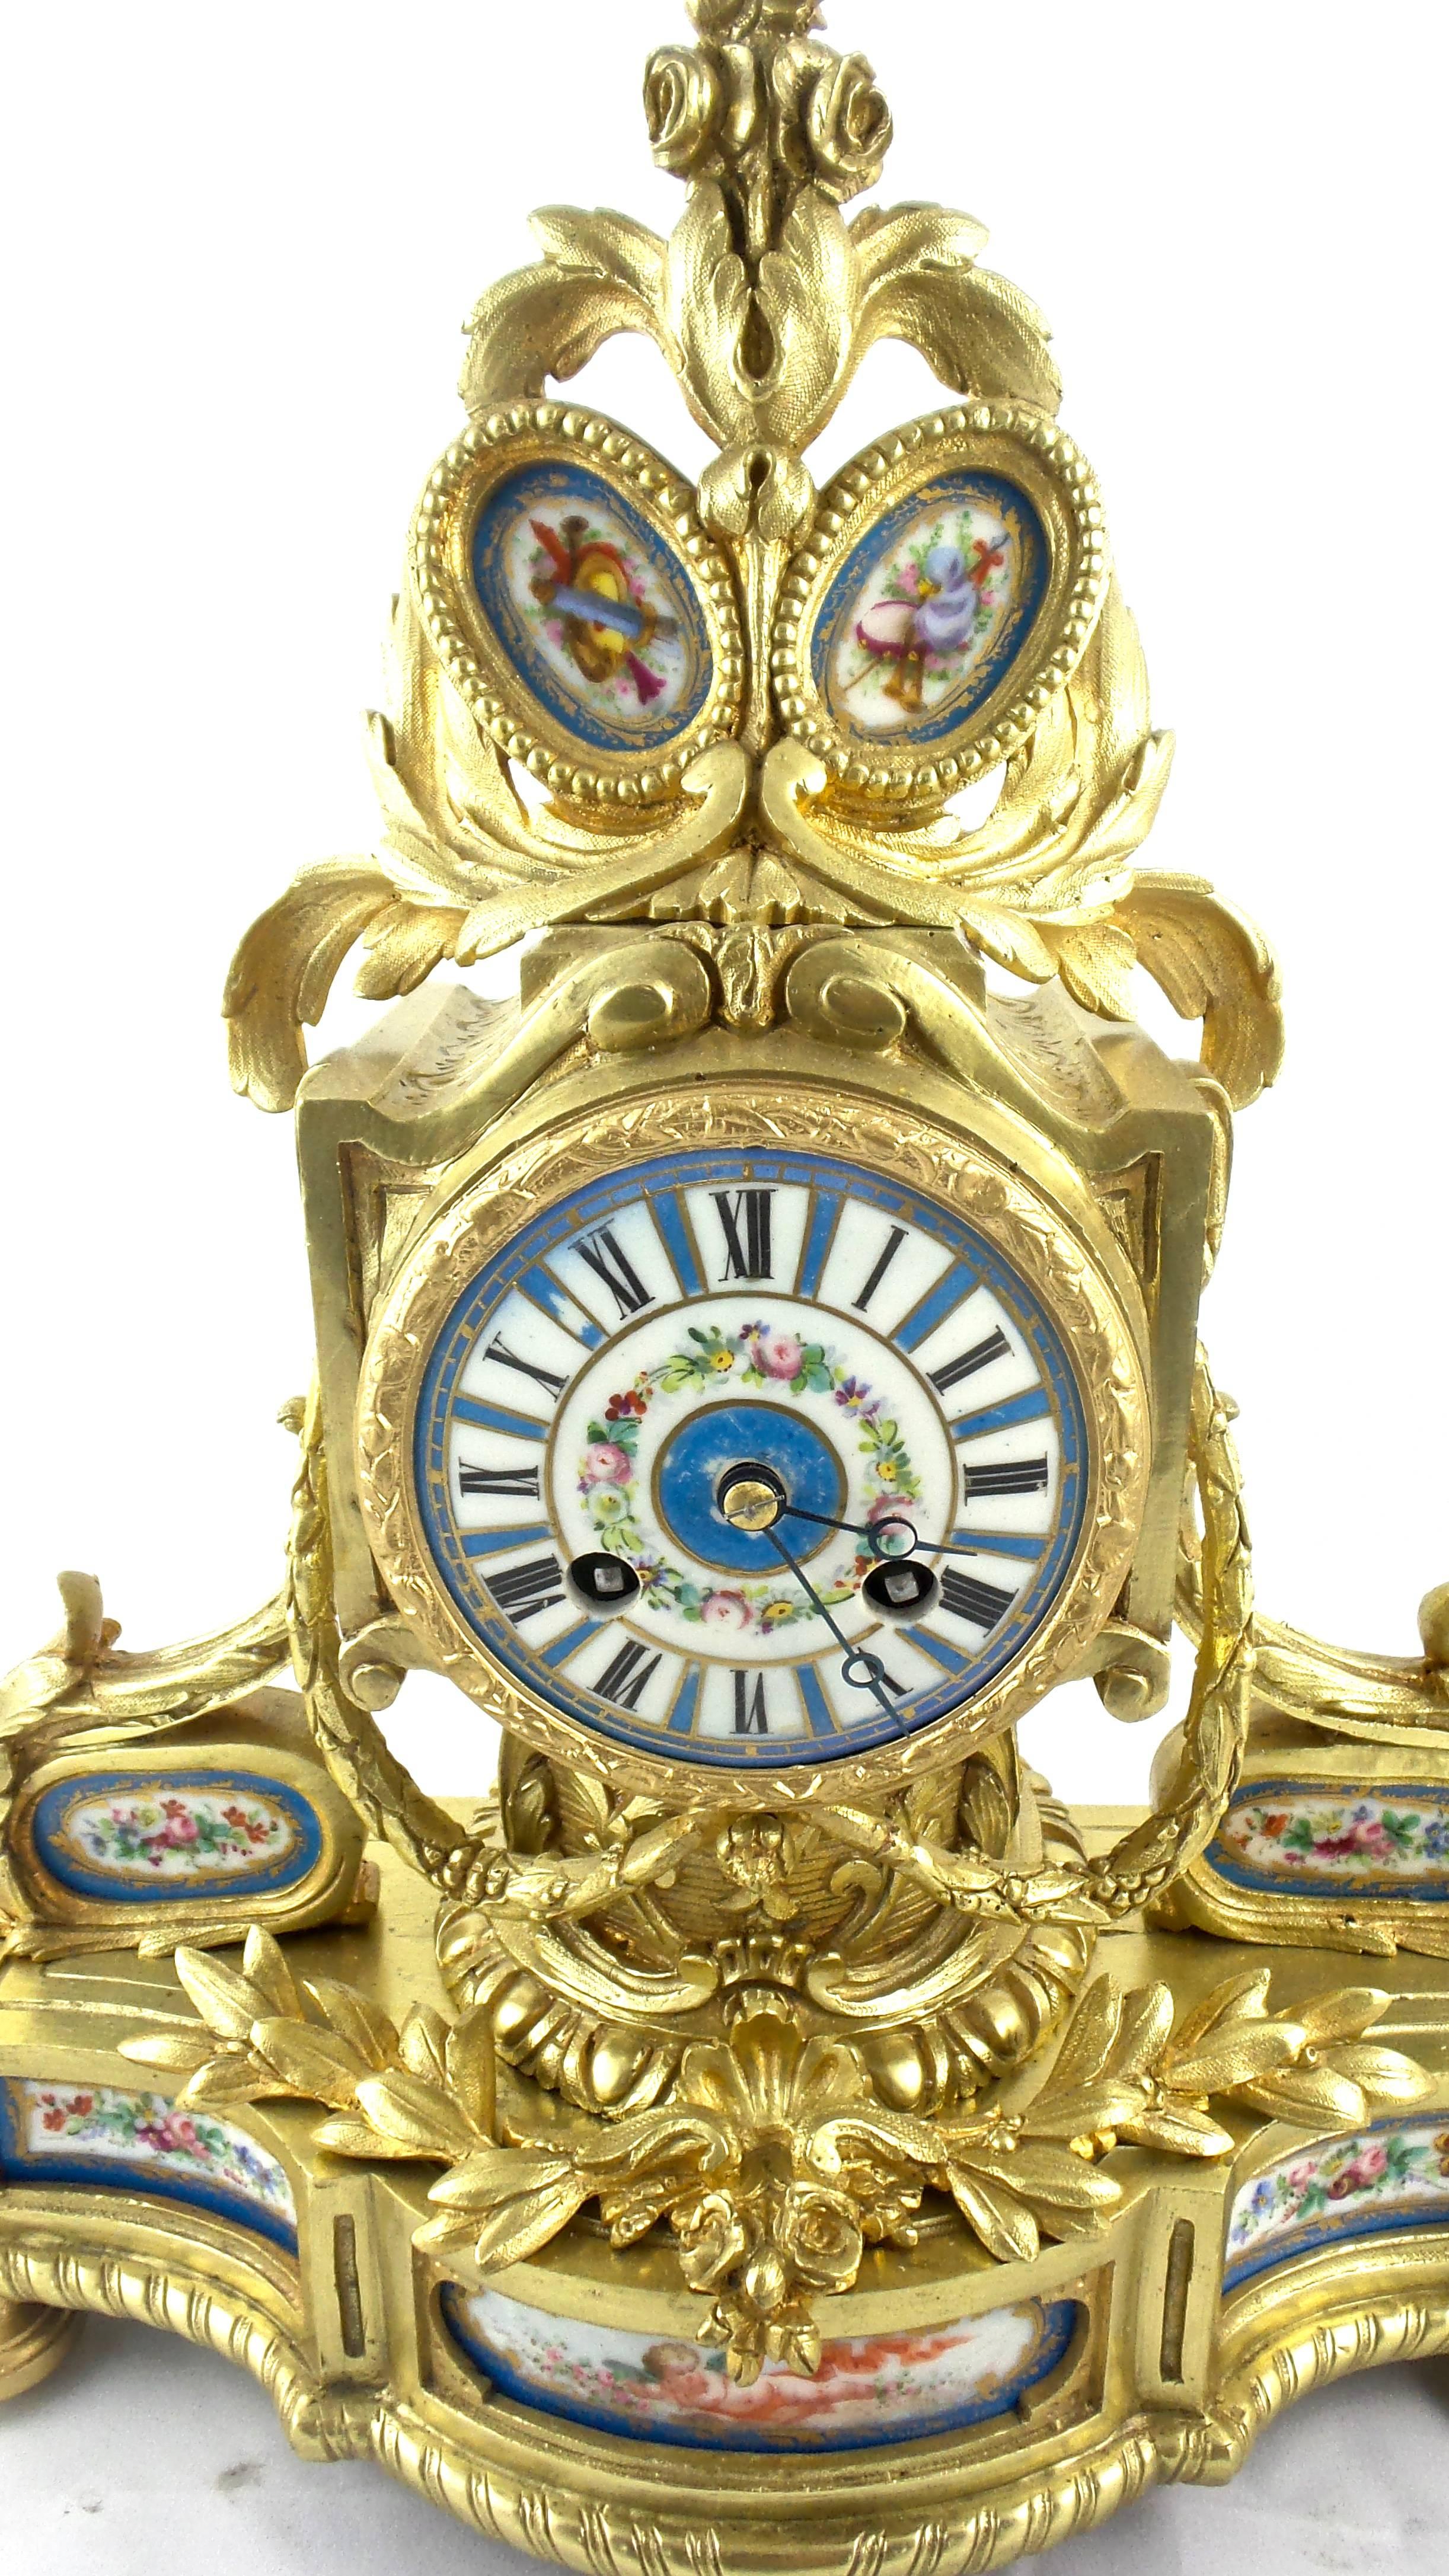 An original authentic antique 19th century French solid gilt brass and hand-painted Sevres porcelain mantel clock
Very impressive clock and very beautifully decorated
Having draped sections and acanthus displays
Hand-painted Sevres porcelain